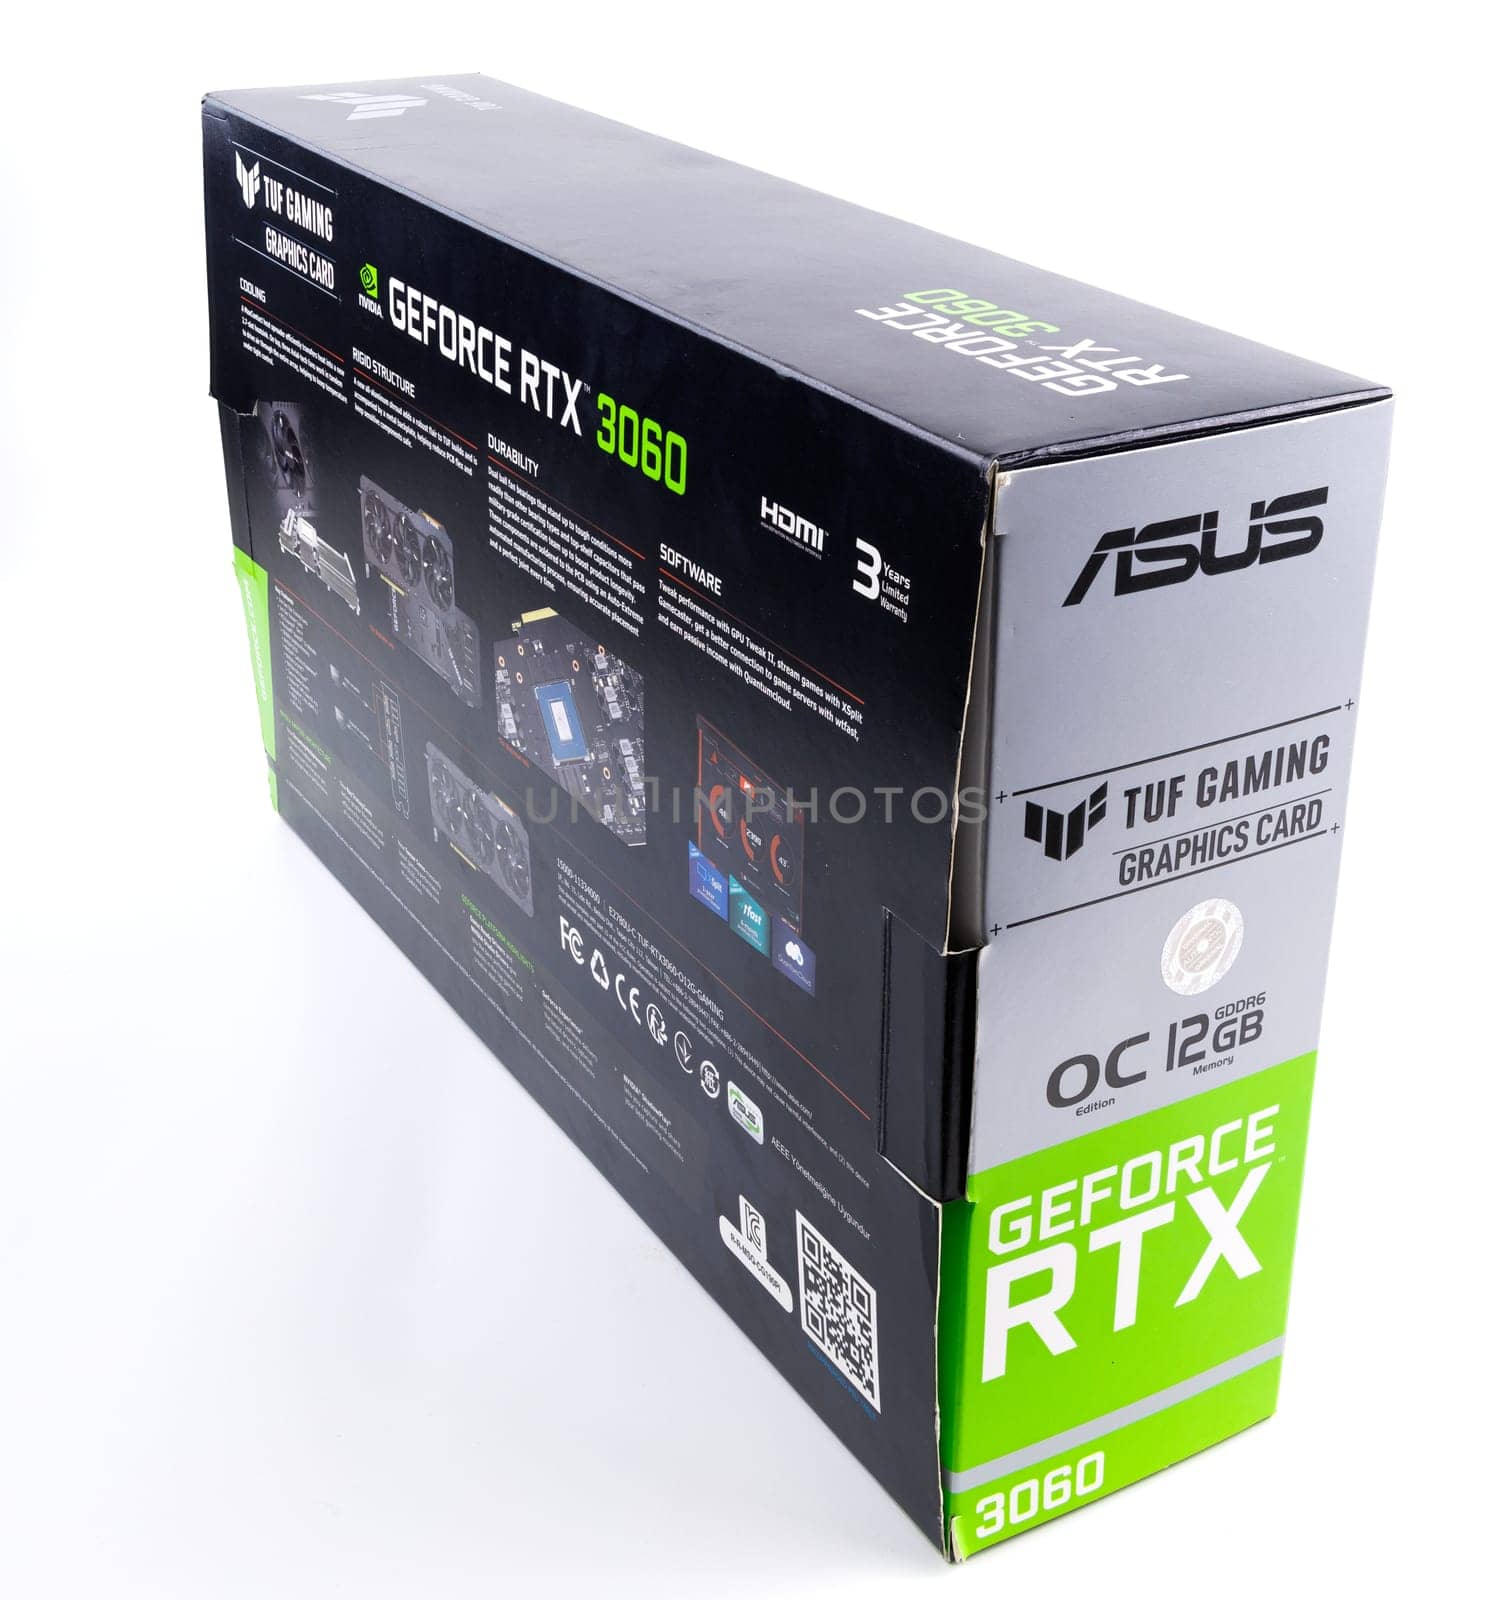 cardboard box of NVIDIA RTX 3060 OC 12g TUF gaming graphics card on white background. Tula, Russia - July 26, 2022